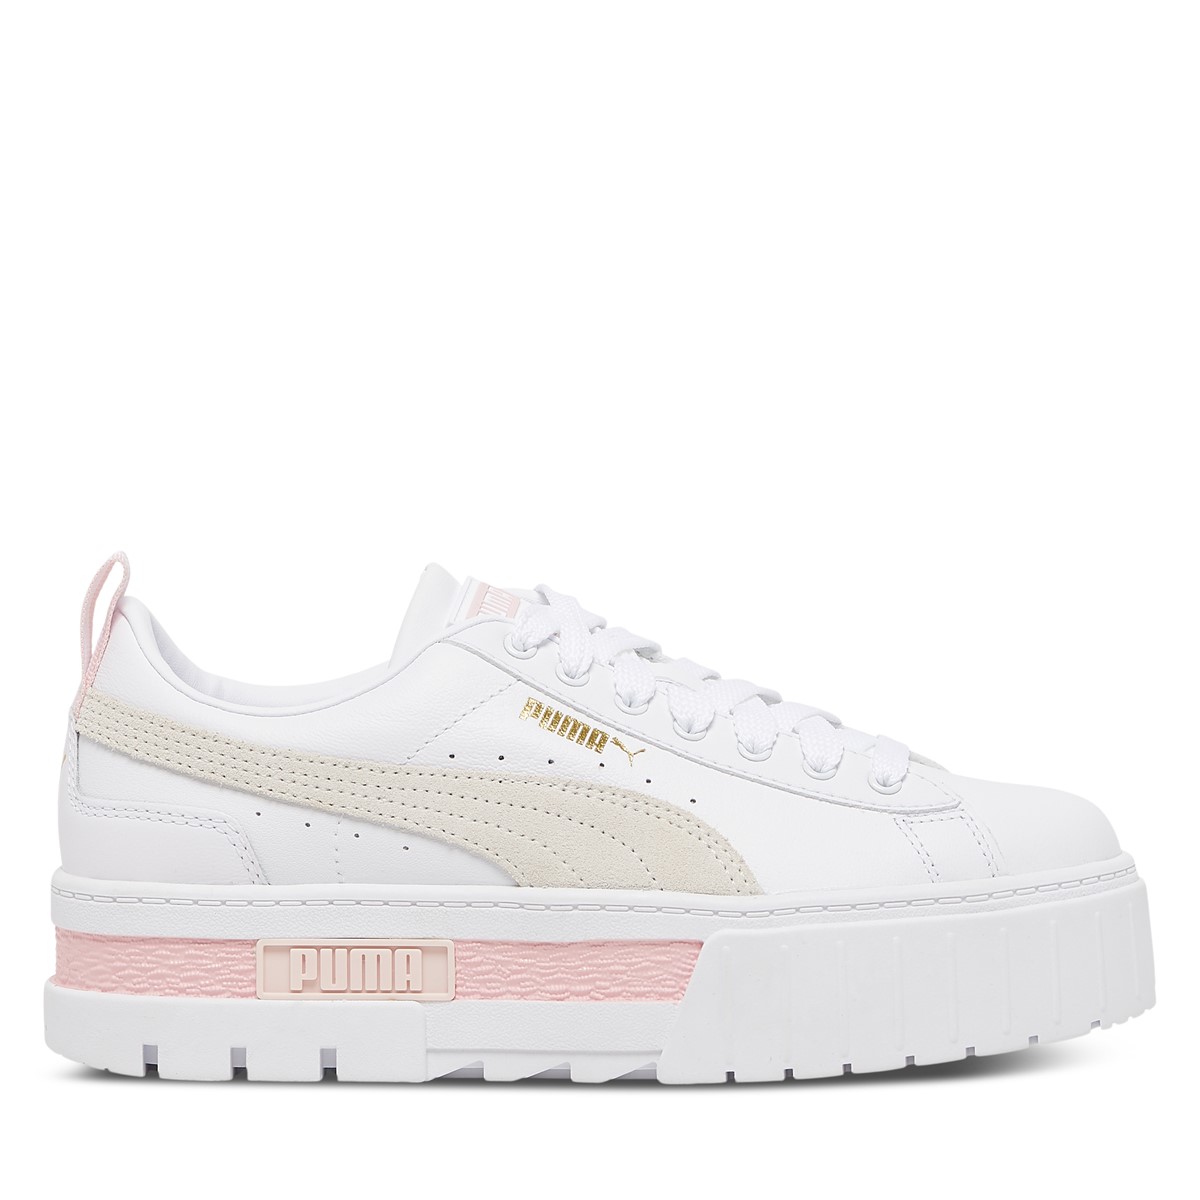 Women's Mayze Leather Sneakers in White/Pink